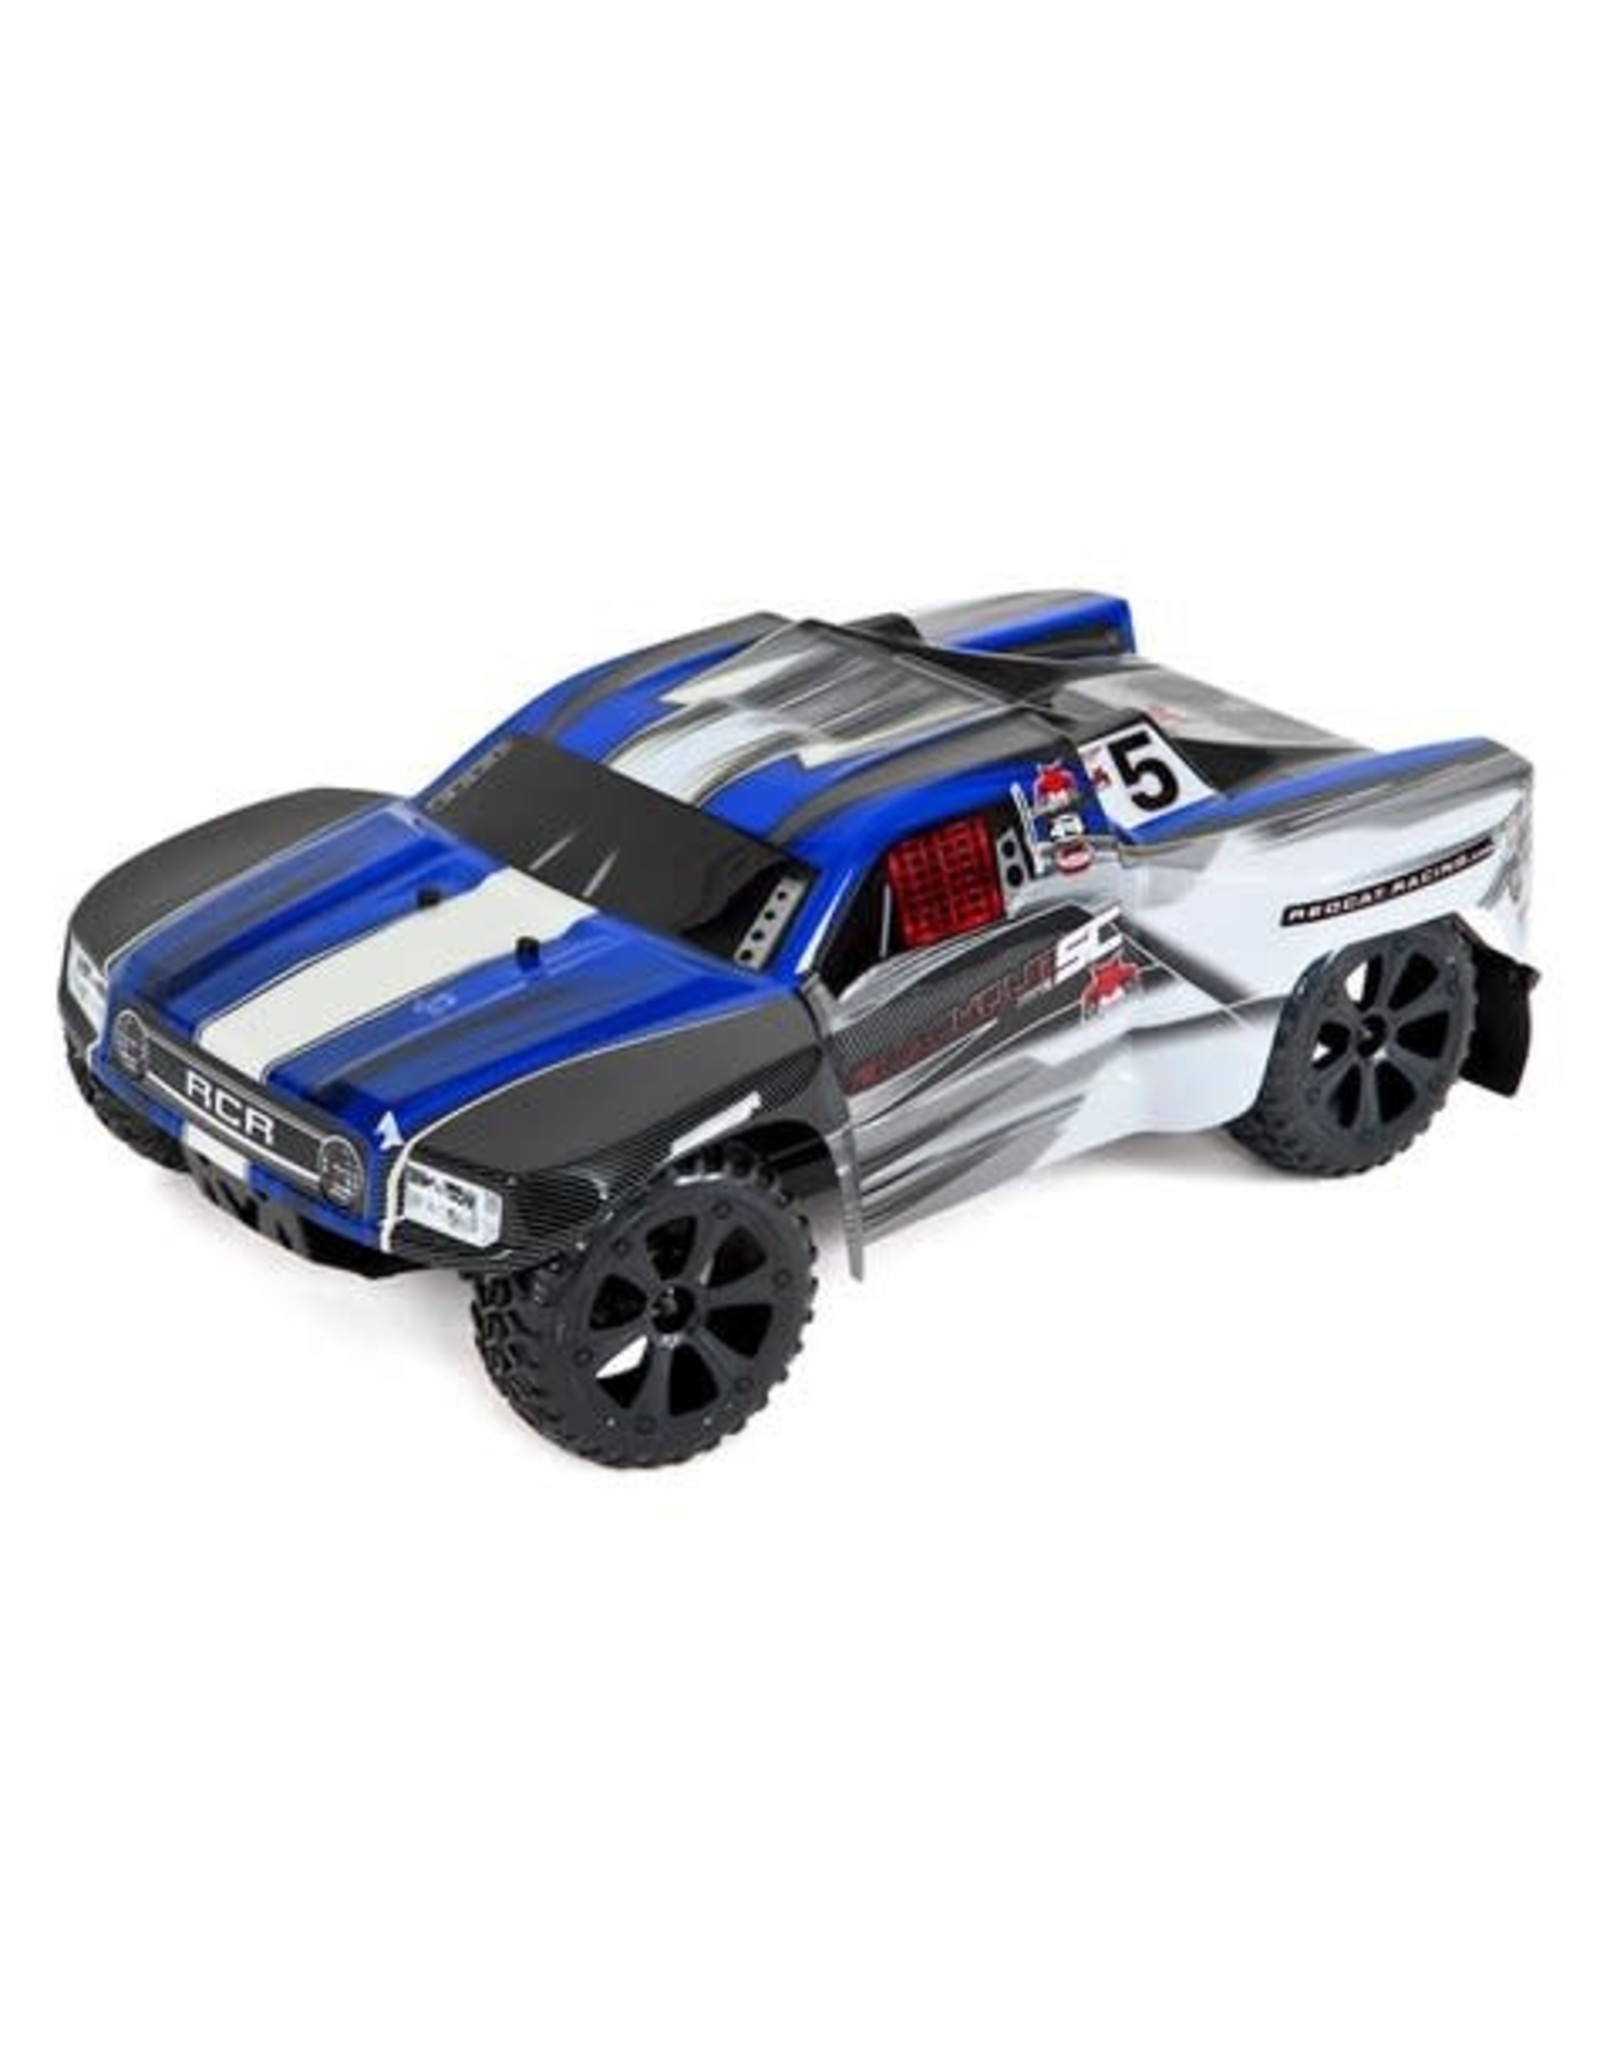 Redcat Racing Redcat Blackout SC RC Truck - 1:10 Brushed Electric Short Course Truck Blue